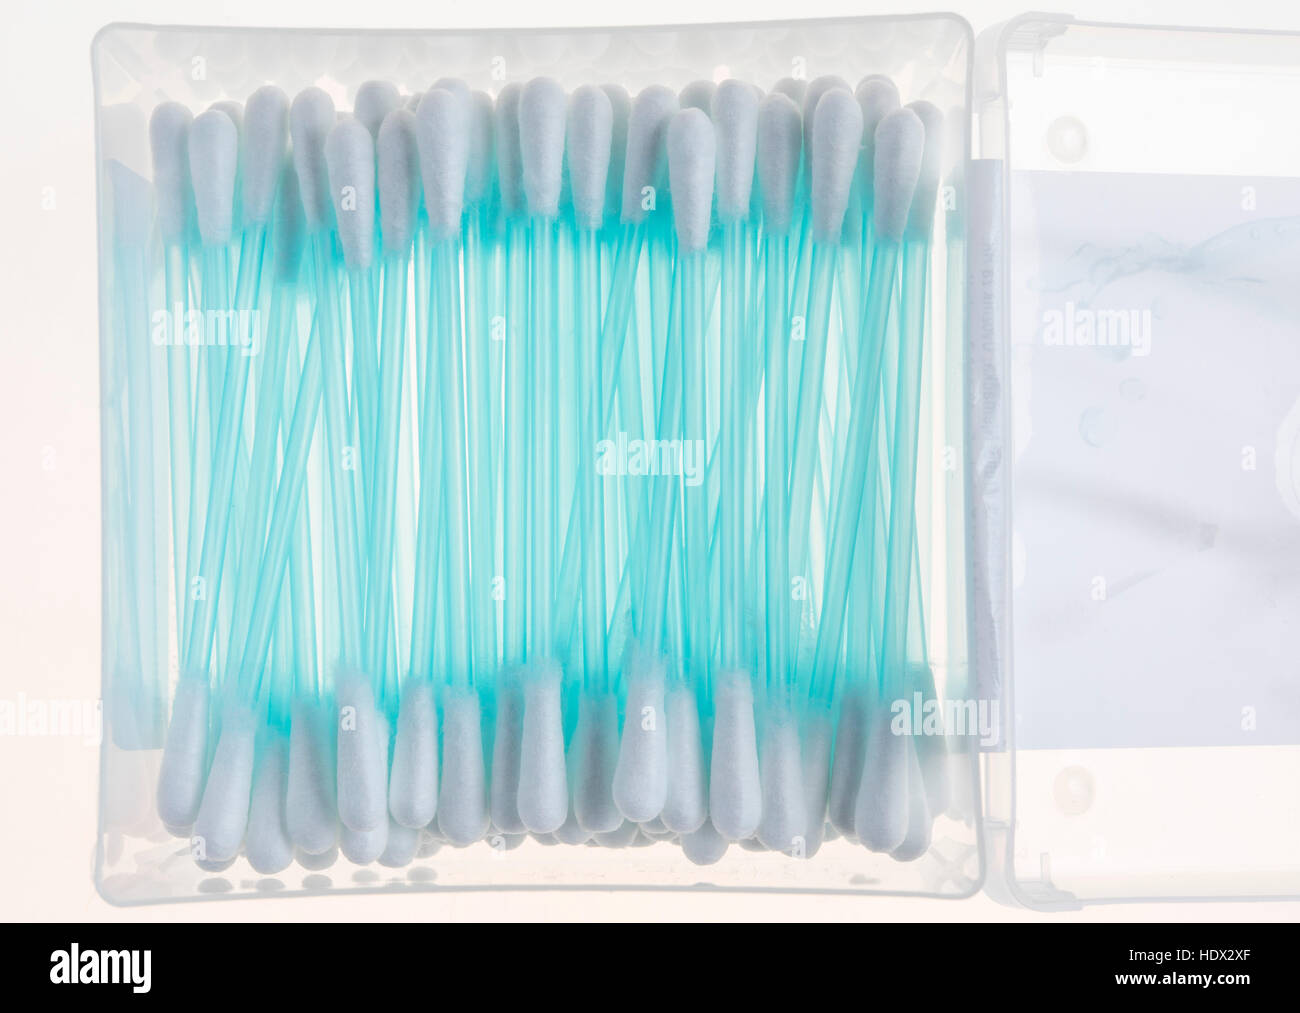 Many cotton buds in a plastic box Stock Photo